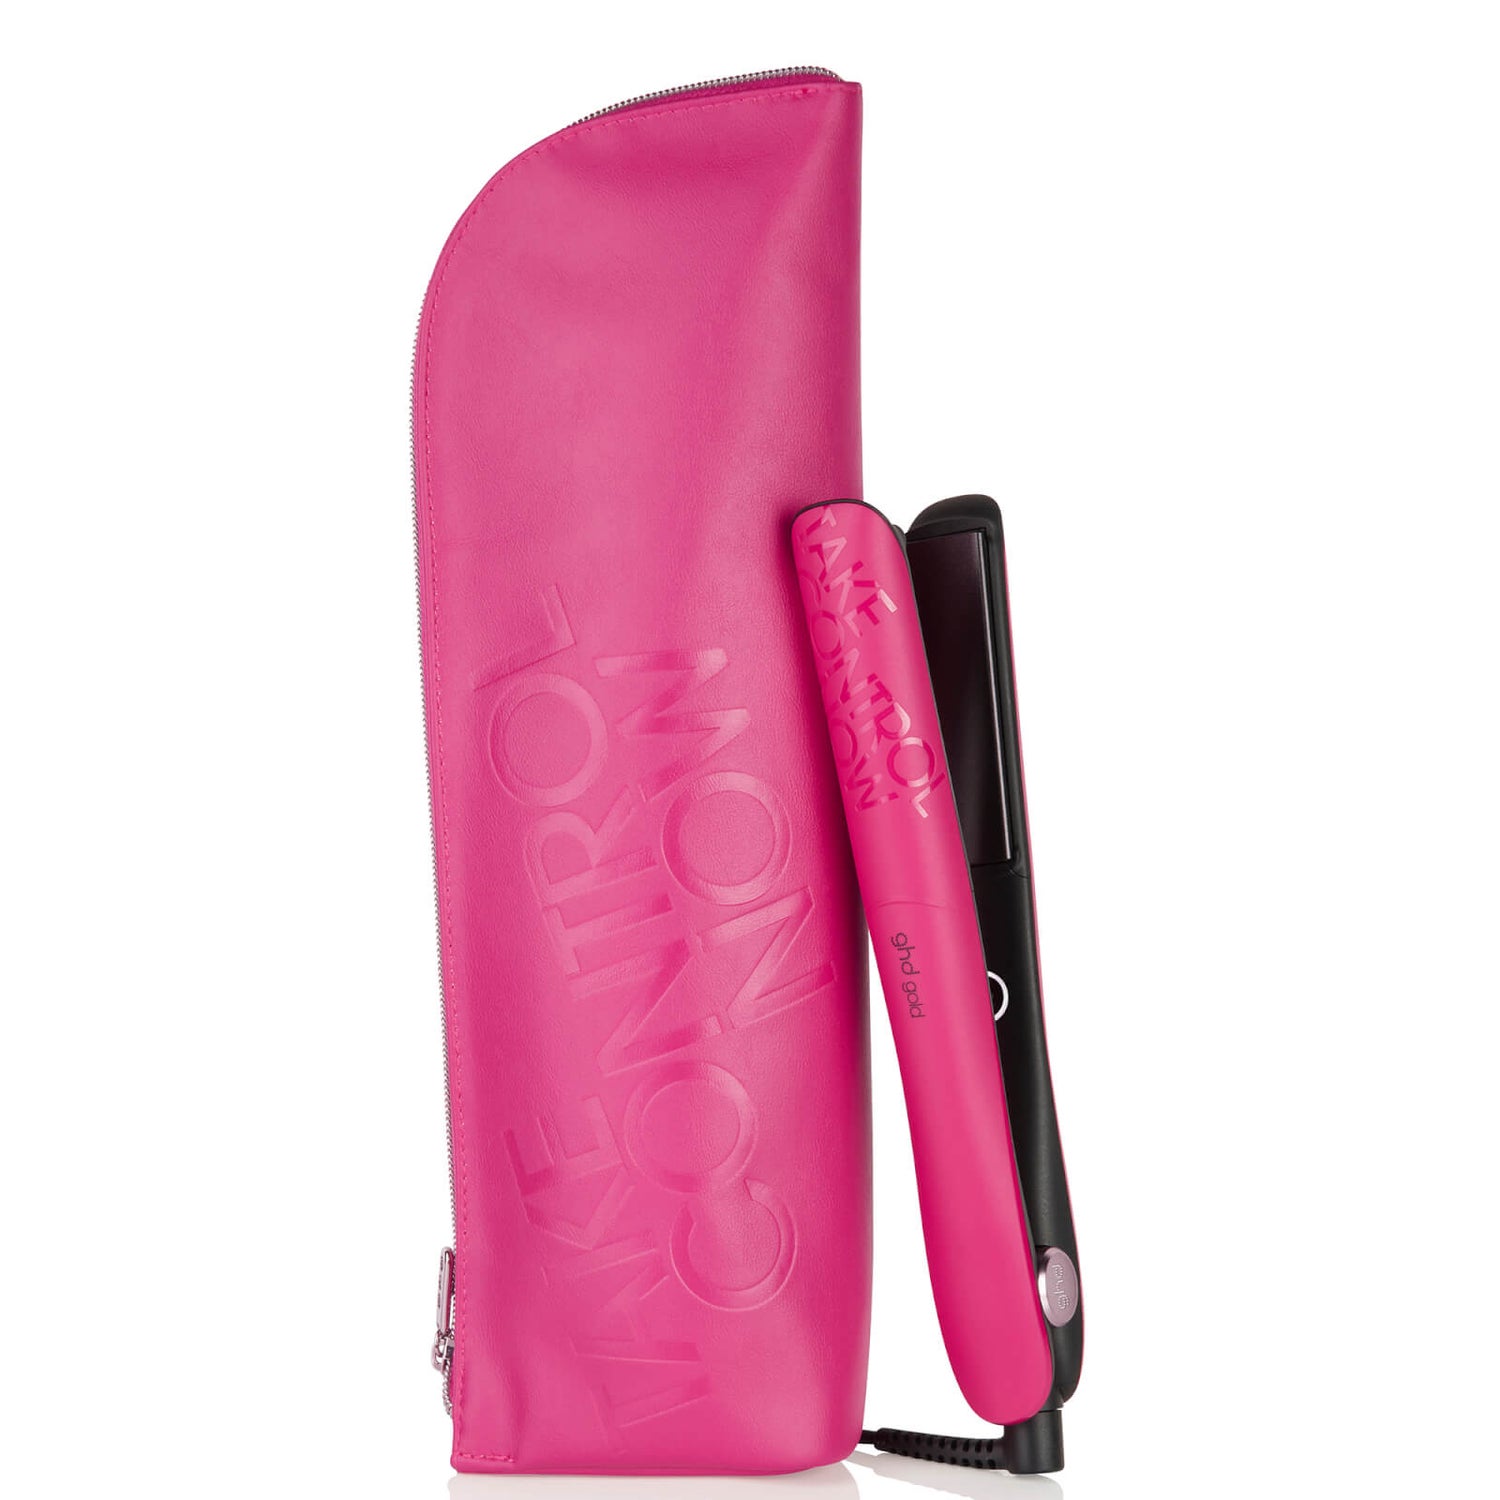 ghd Limited Edition Gold Styler 1 Inch Flat Iron - Orchid Pink